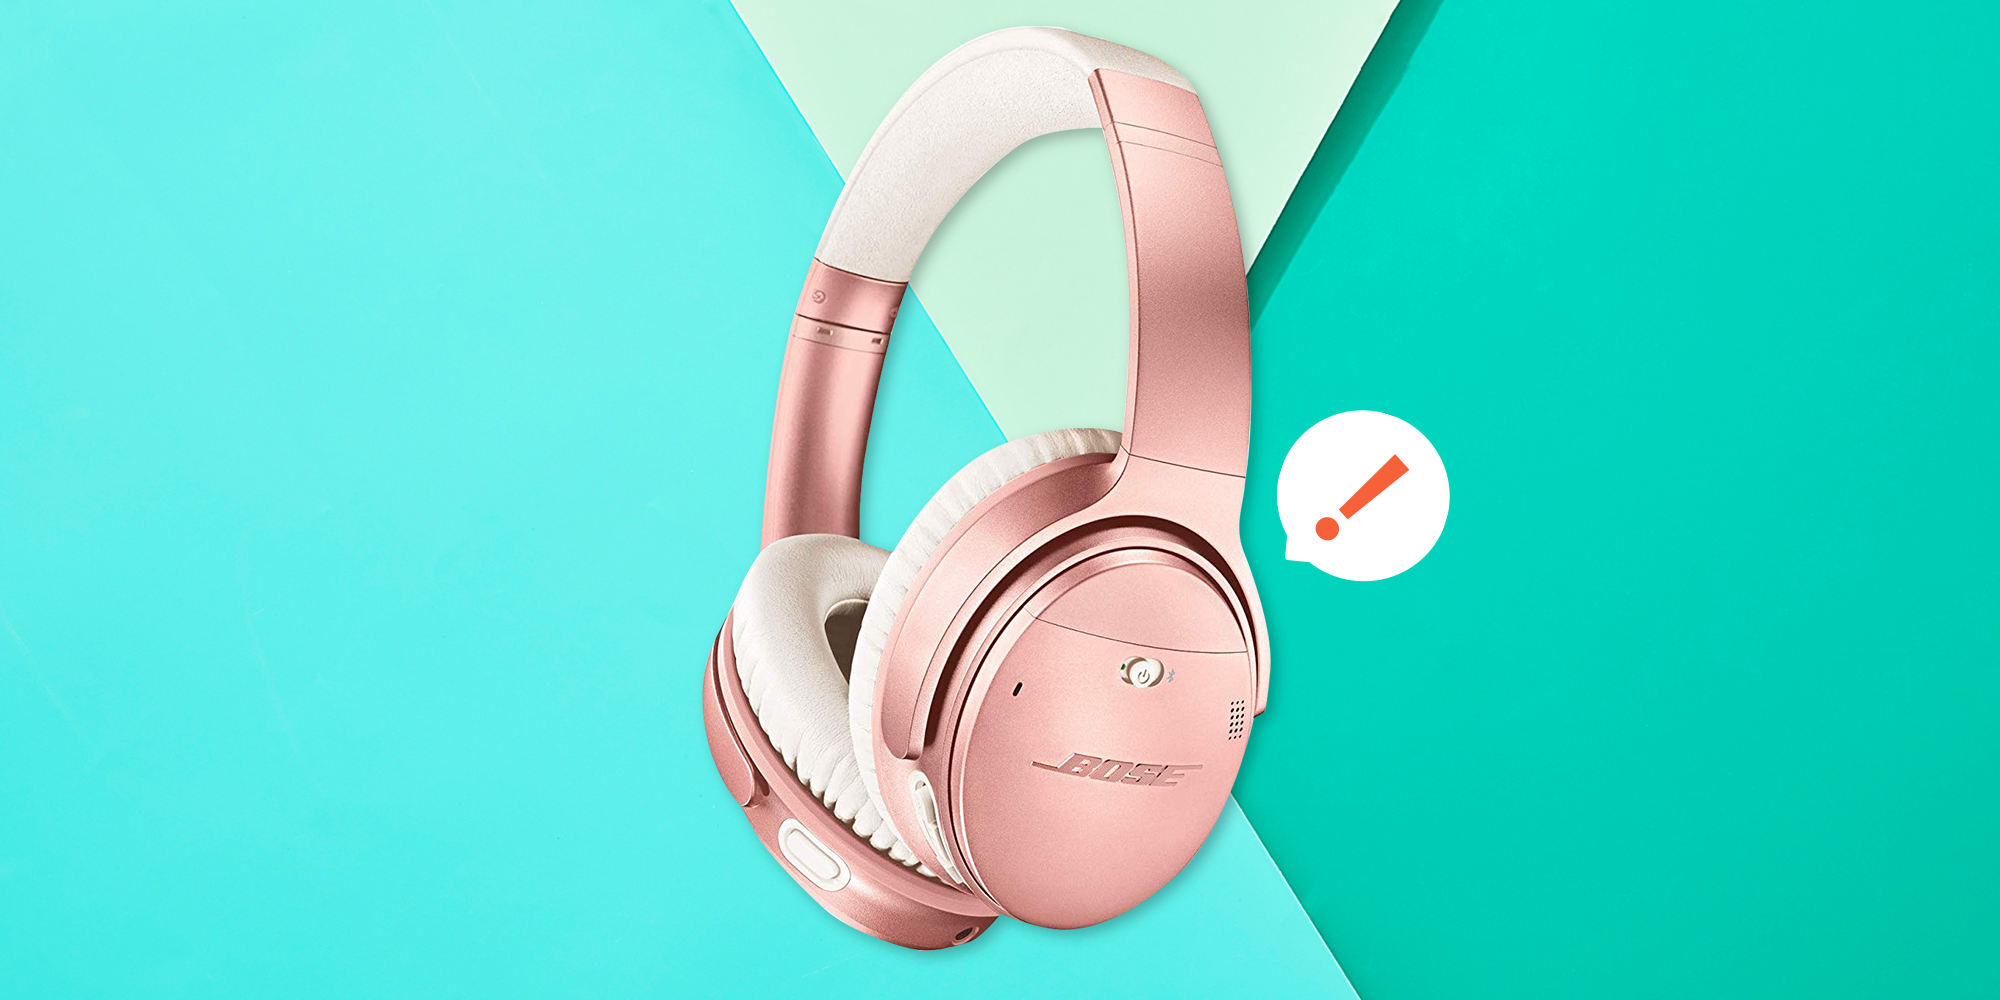 Bose's Noise-Cancelling Headphones On Sale At Lowest Price Ever